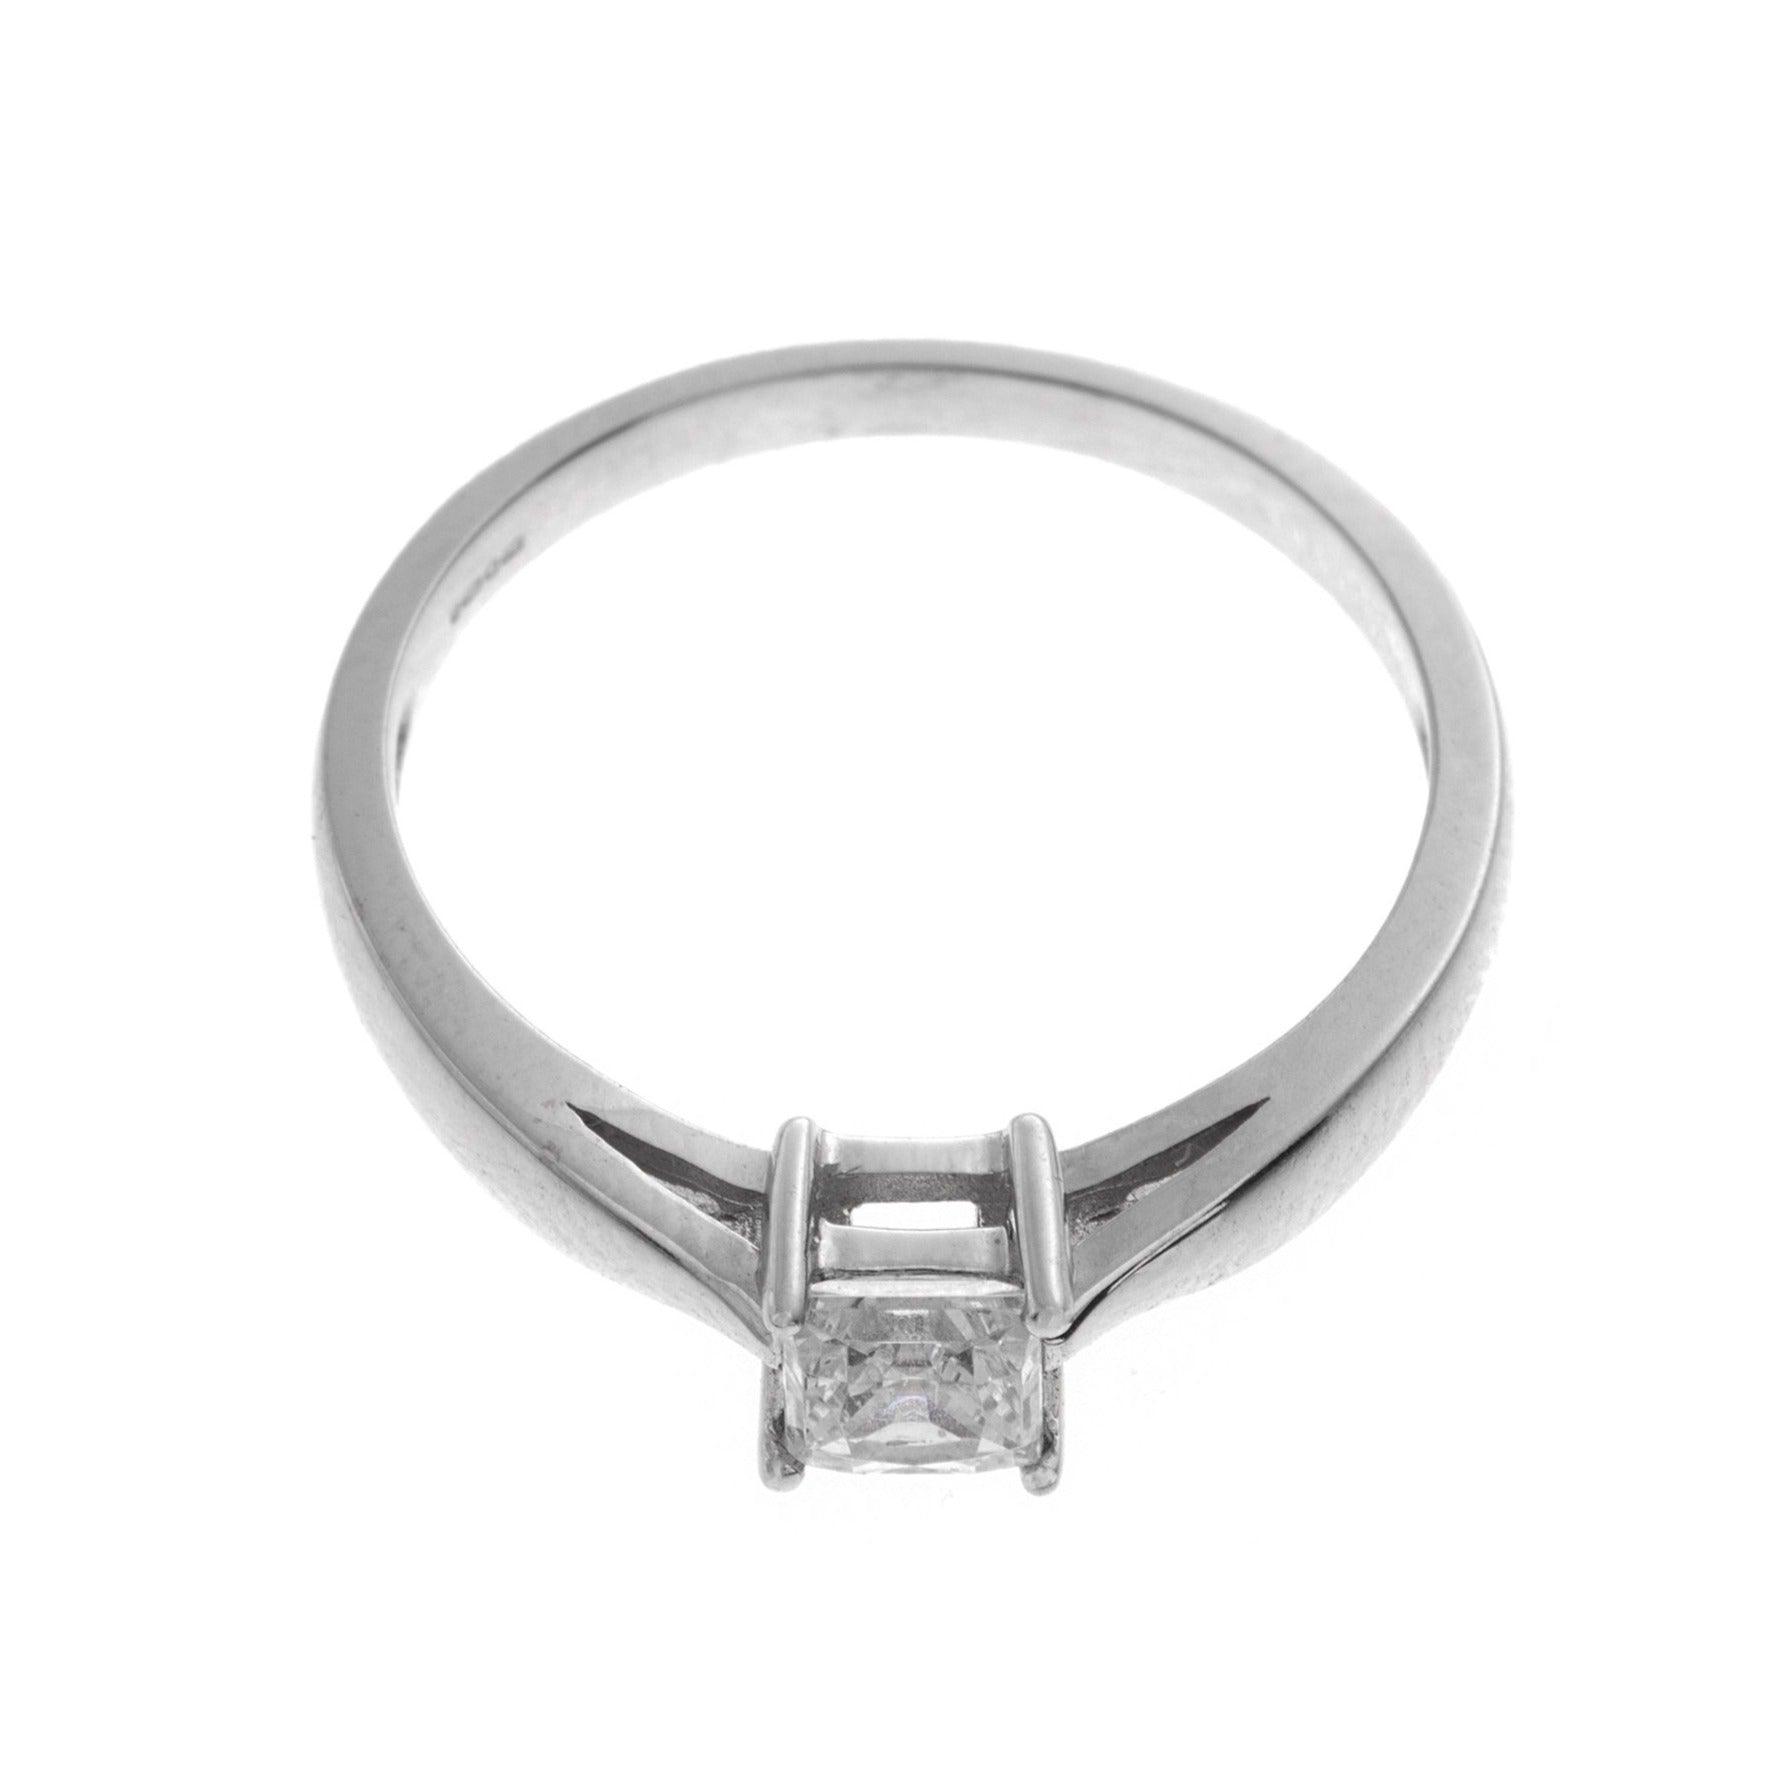 18ct White Gold Cubic Zirconia Engagement Ring (2.23g) LR9012